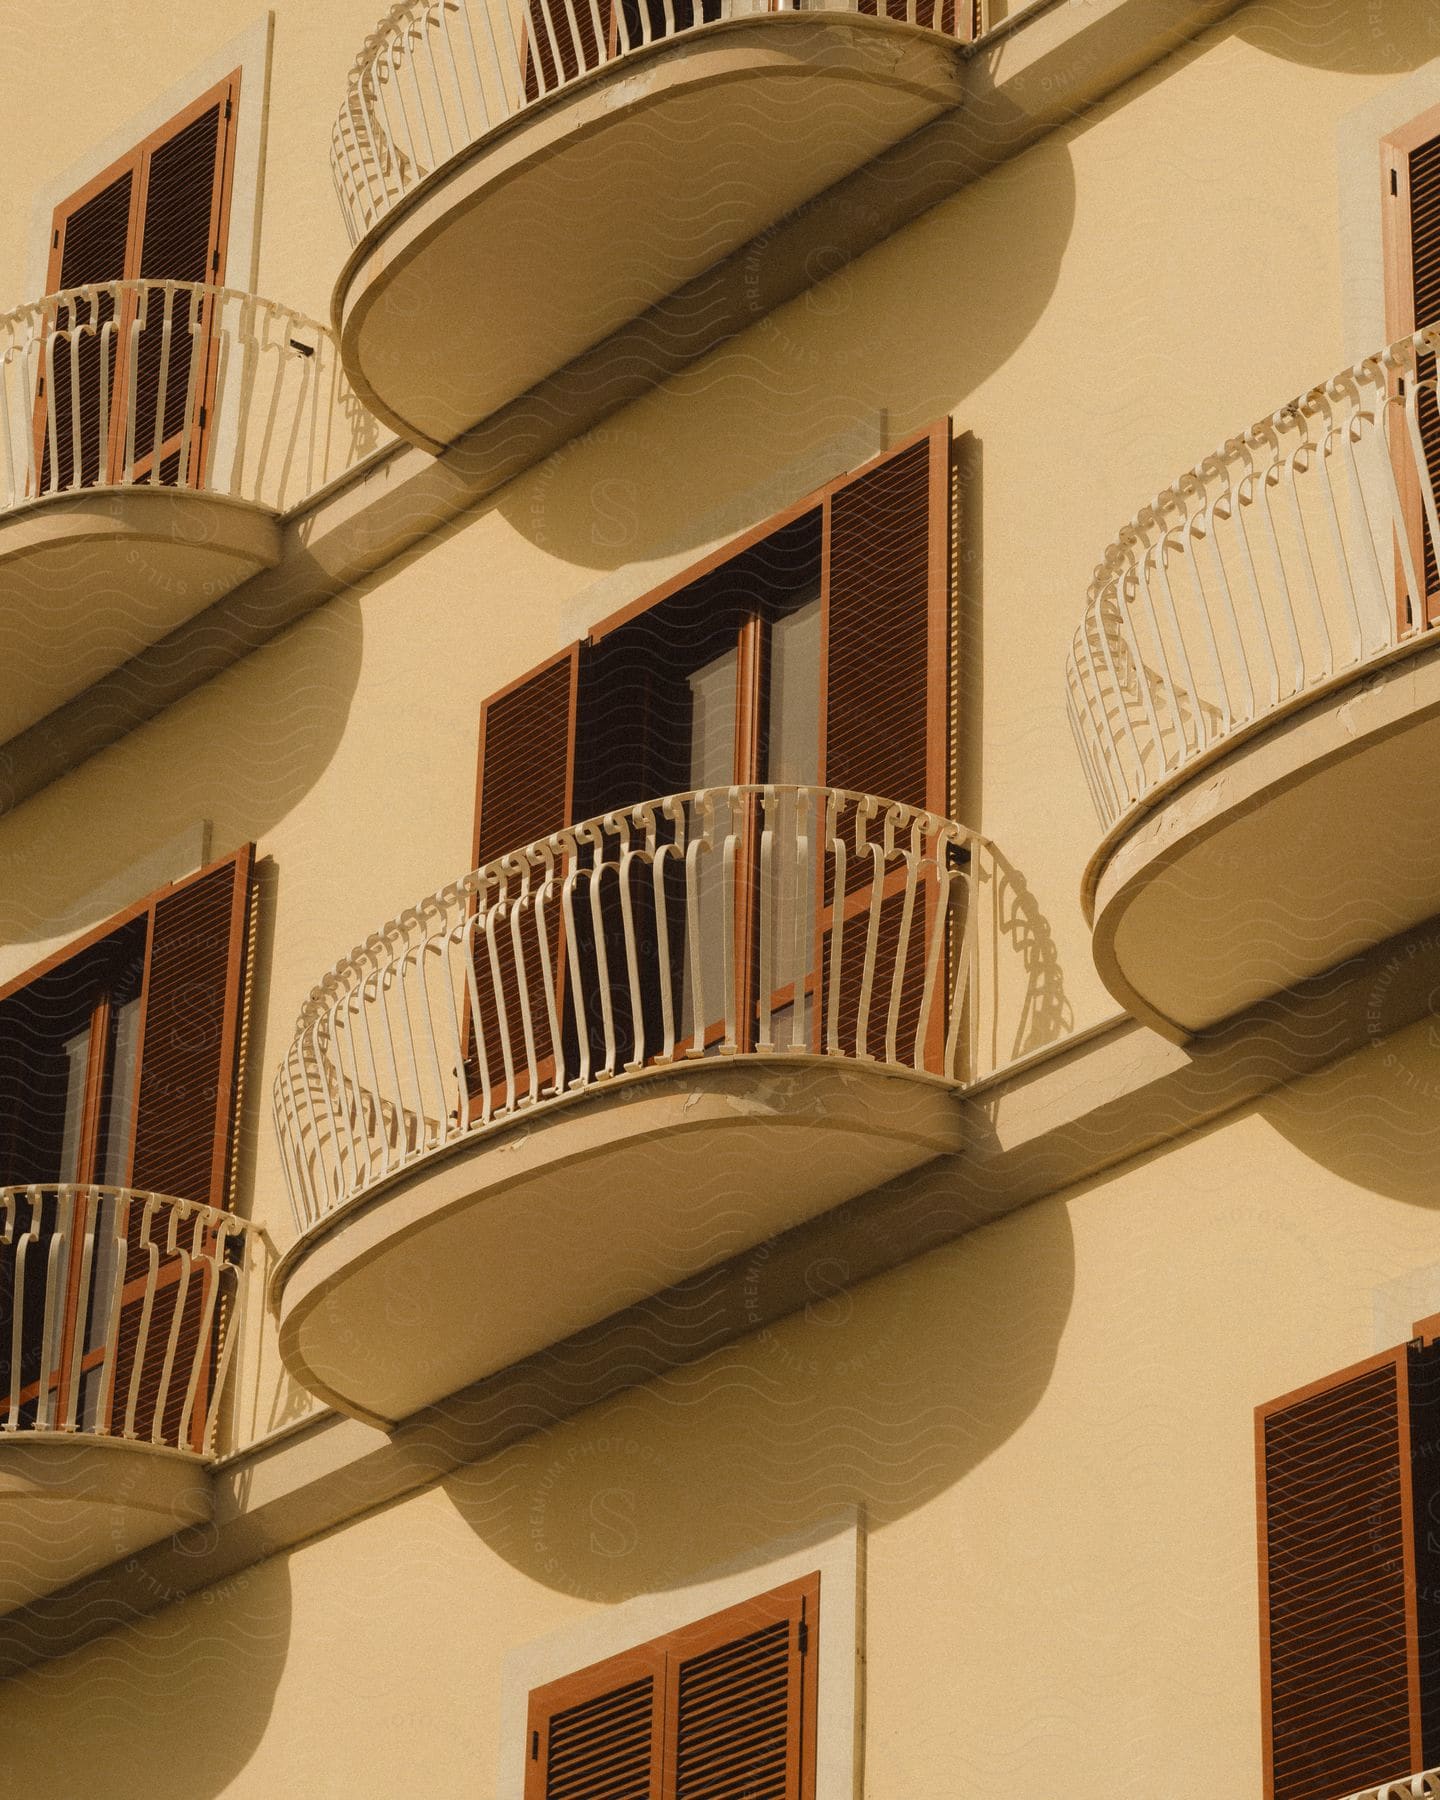 Rounded balconies with stylish railing and shutters on the windows of an apartment building